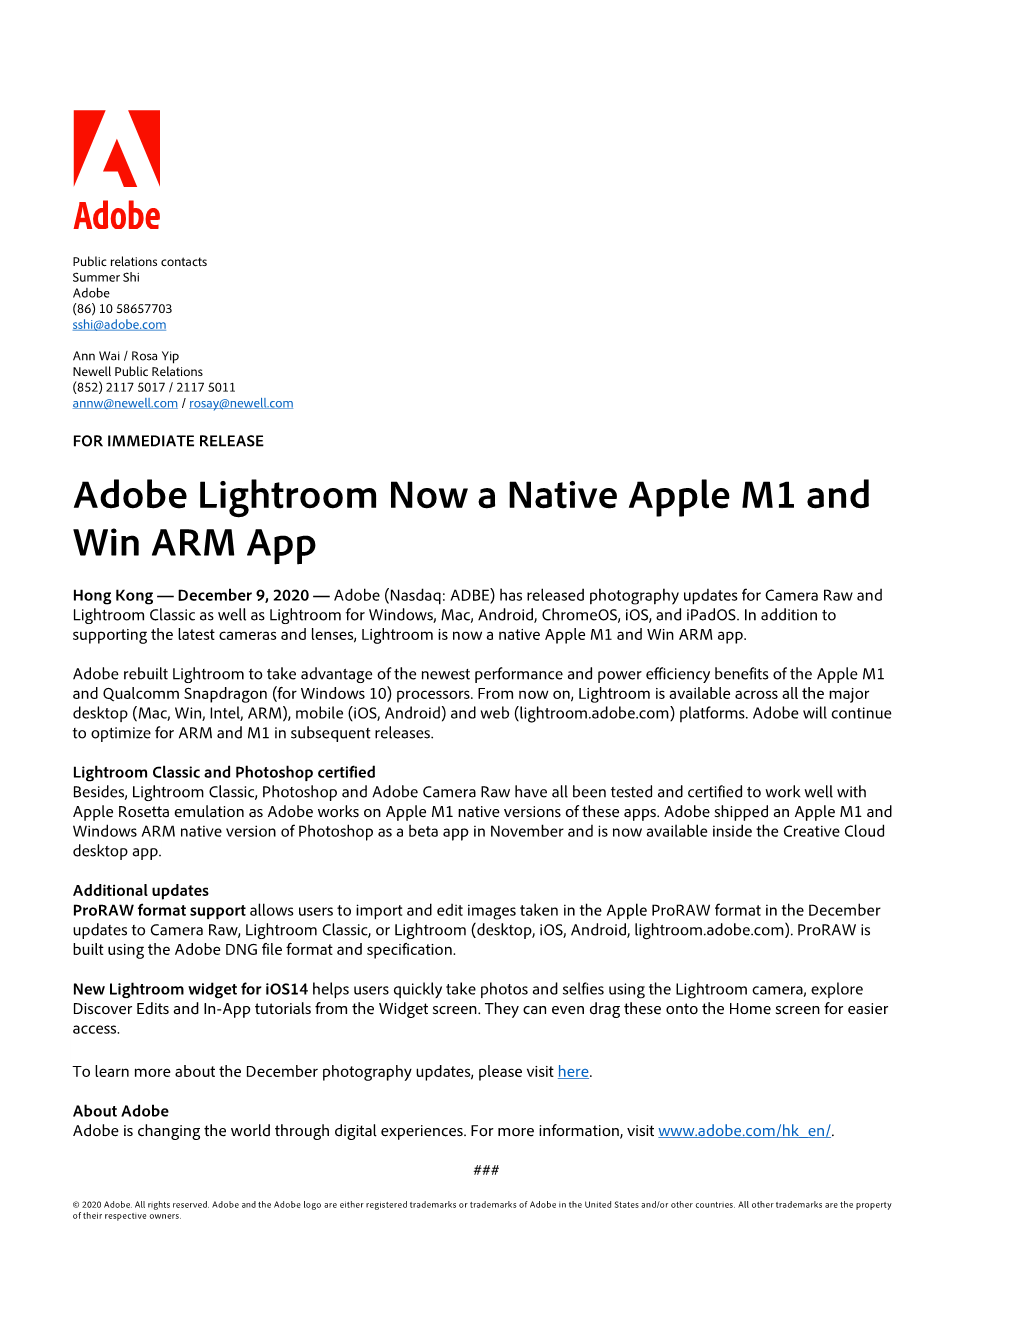 Adobe Lightroom Now a Native Apple M1 and Win ARM App